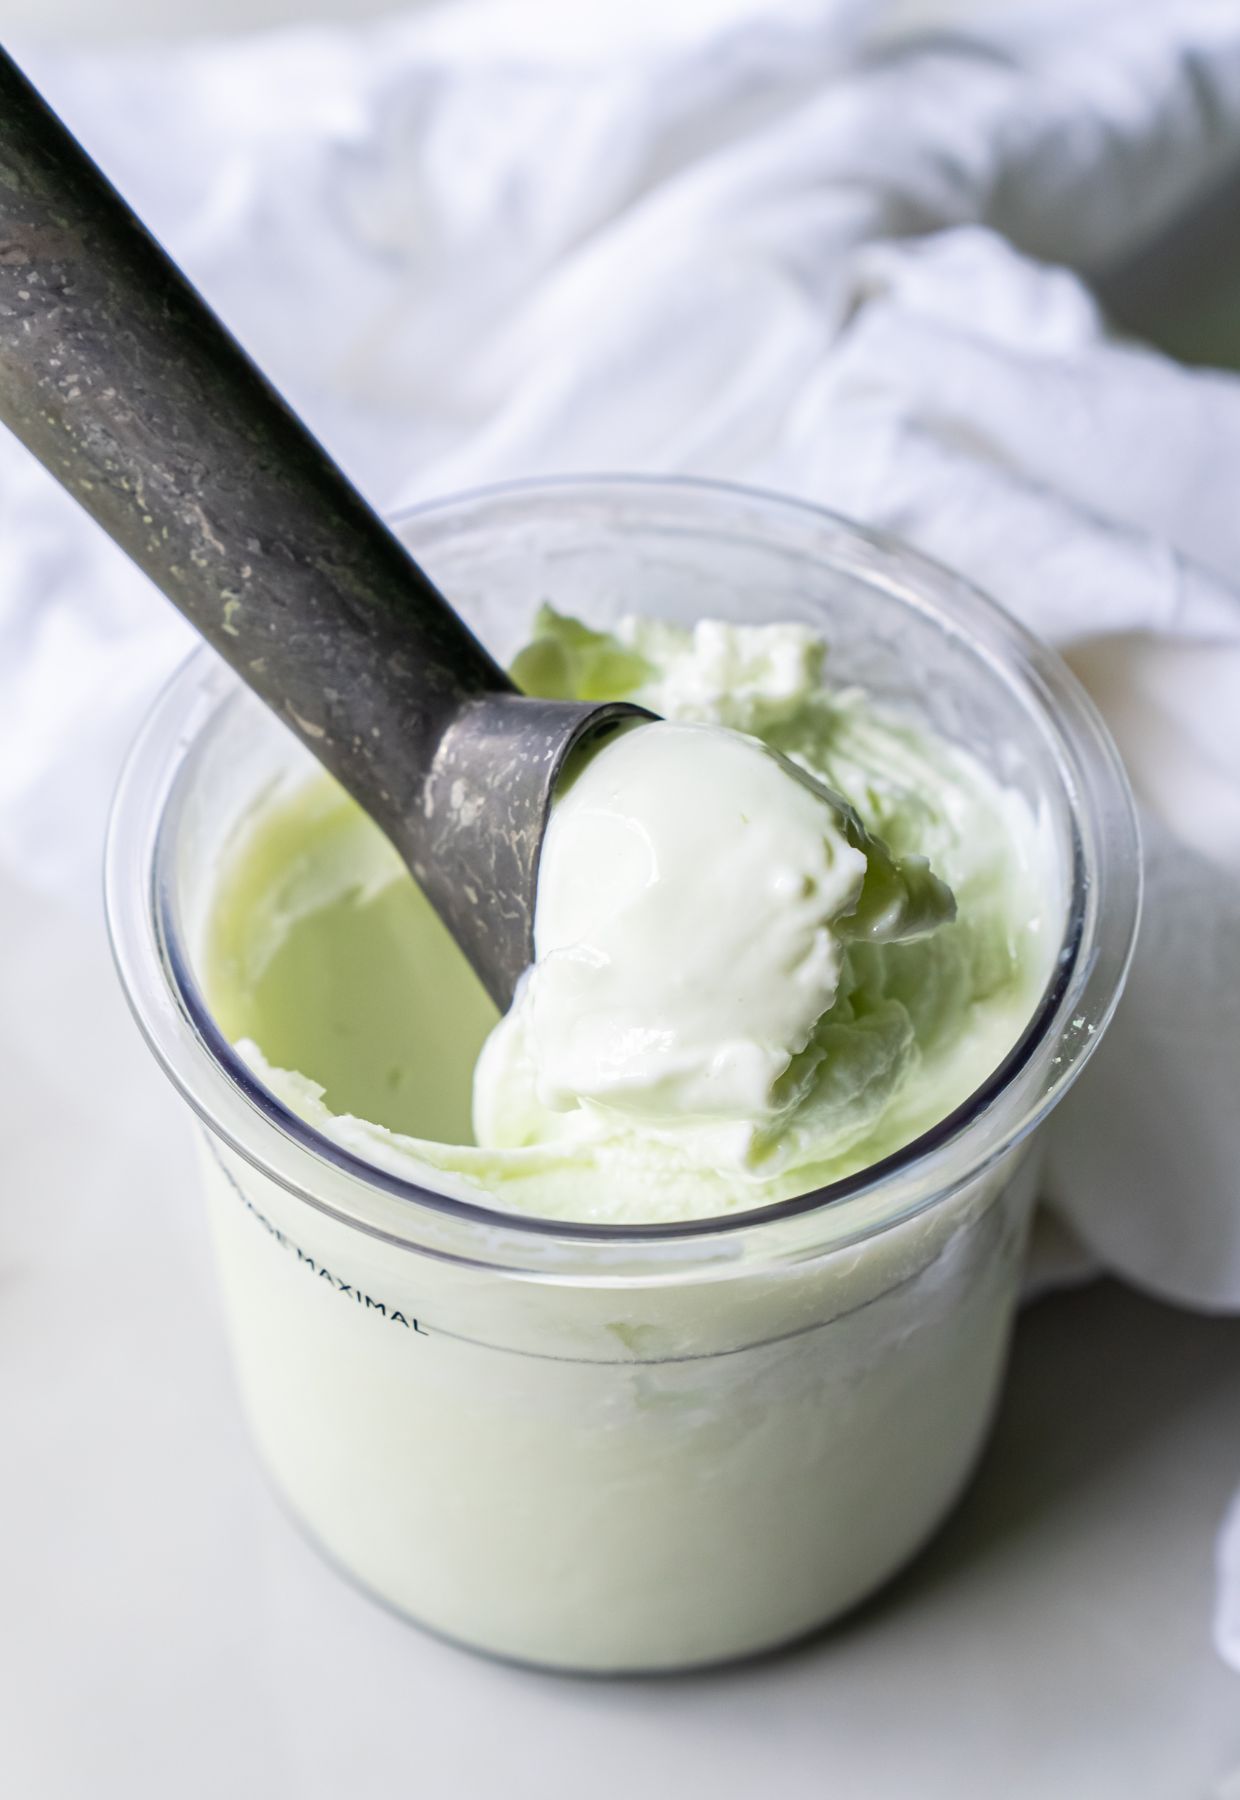 A scoop of light green ice cream is being taken from a container with a metal ice cream scooper, adding a delightful touch to the world of desserts.